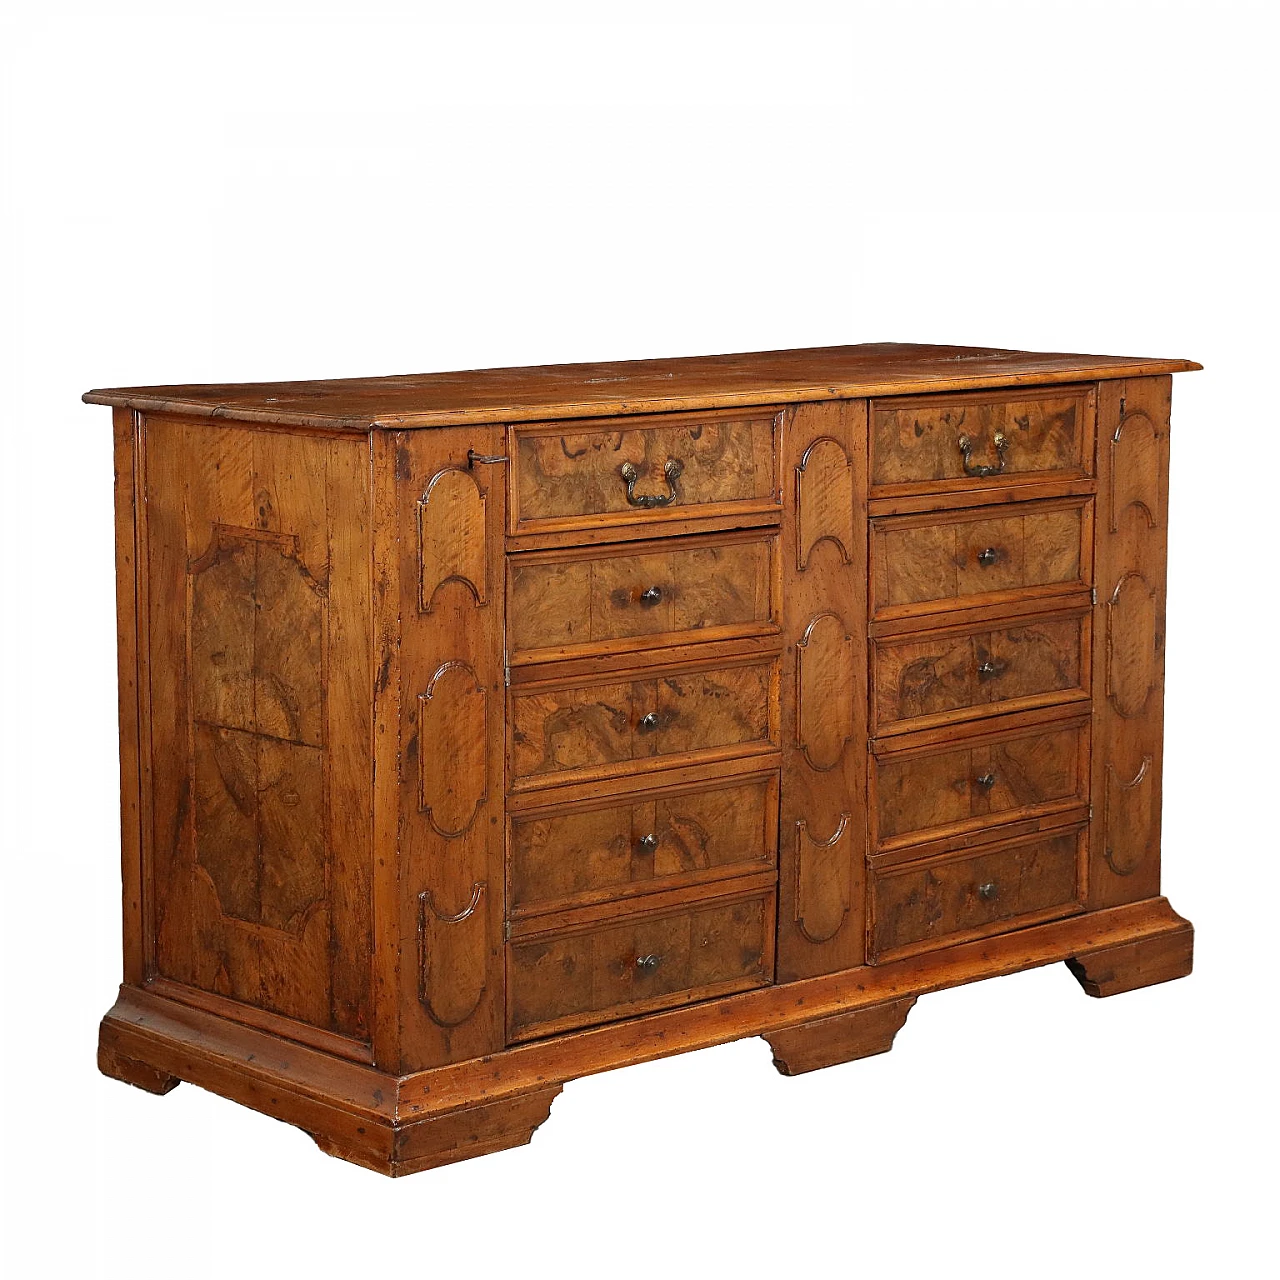 Walnut sideboard with opening top, 18th century 1